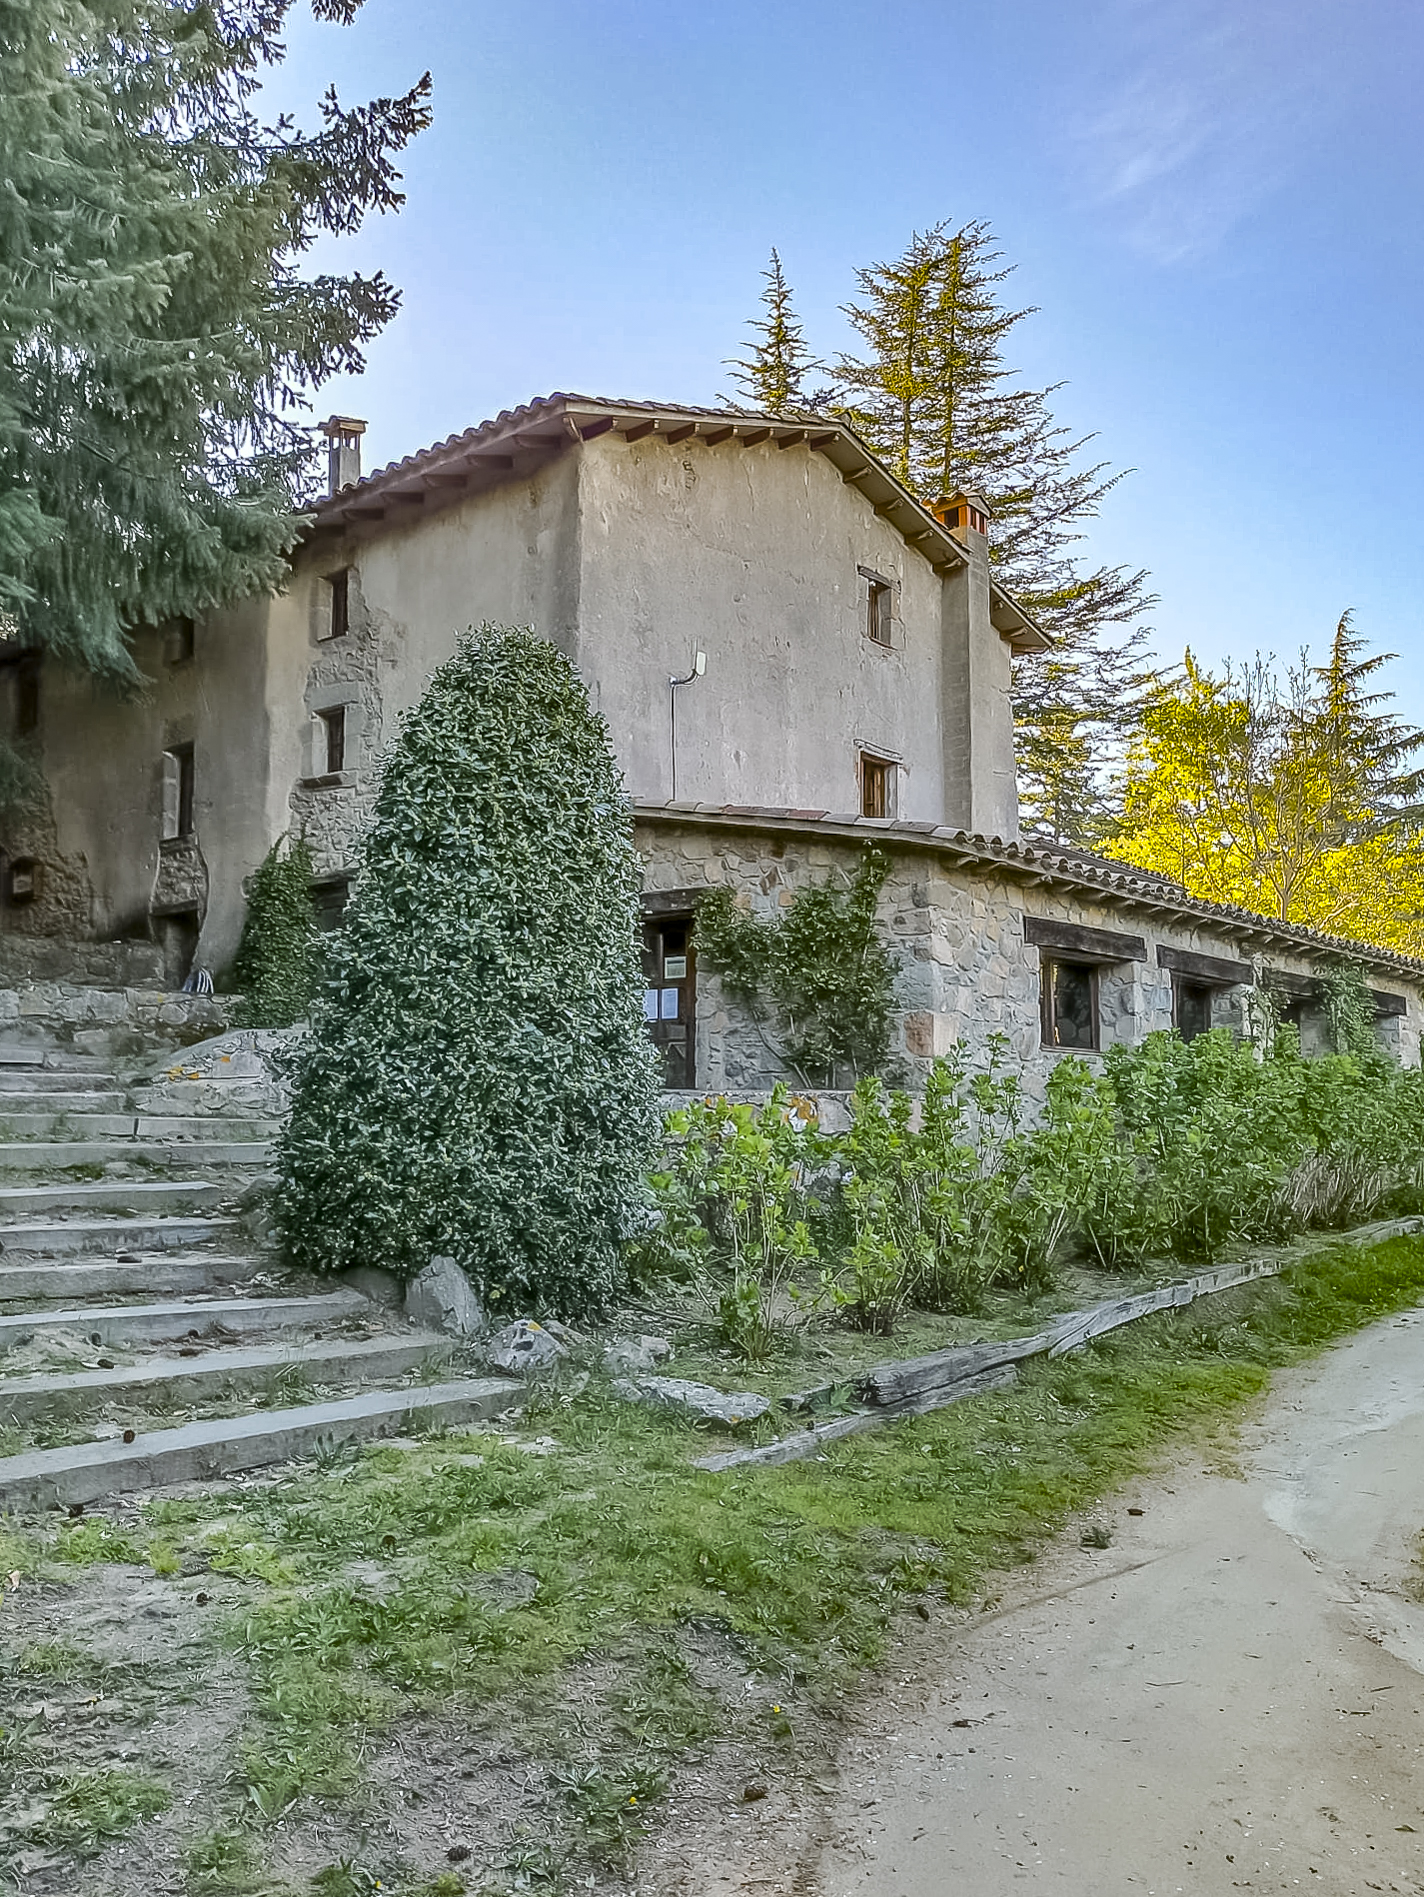 House in the natural park of Montseny.  Swimming pool and communal area